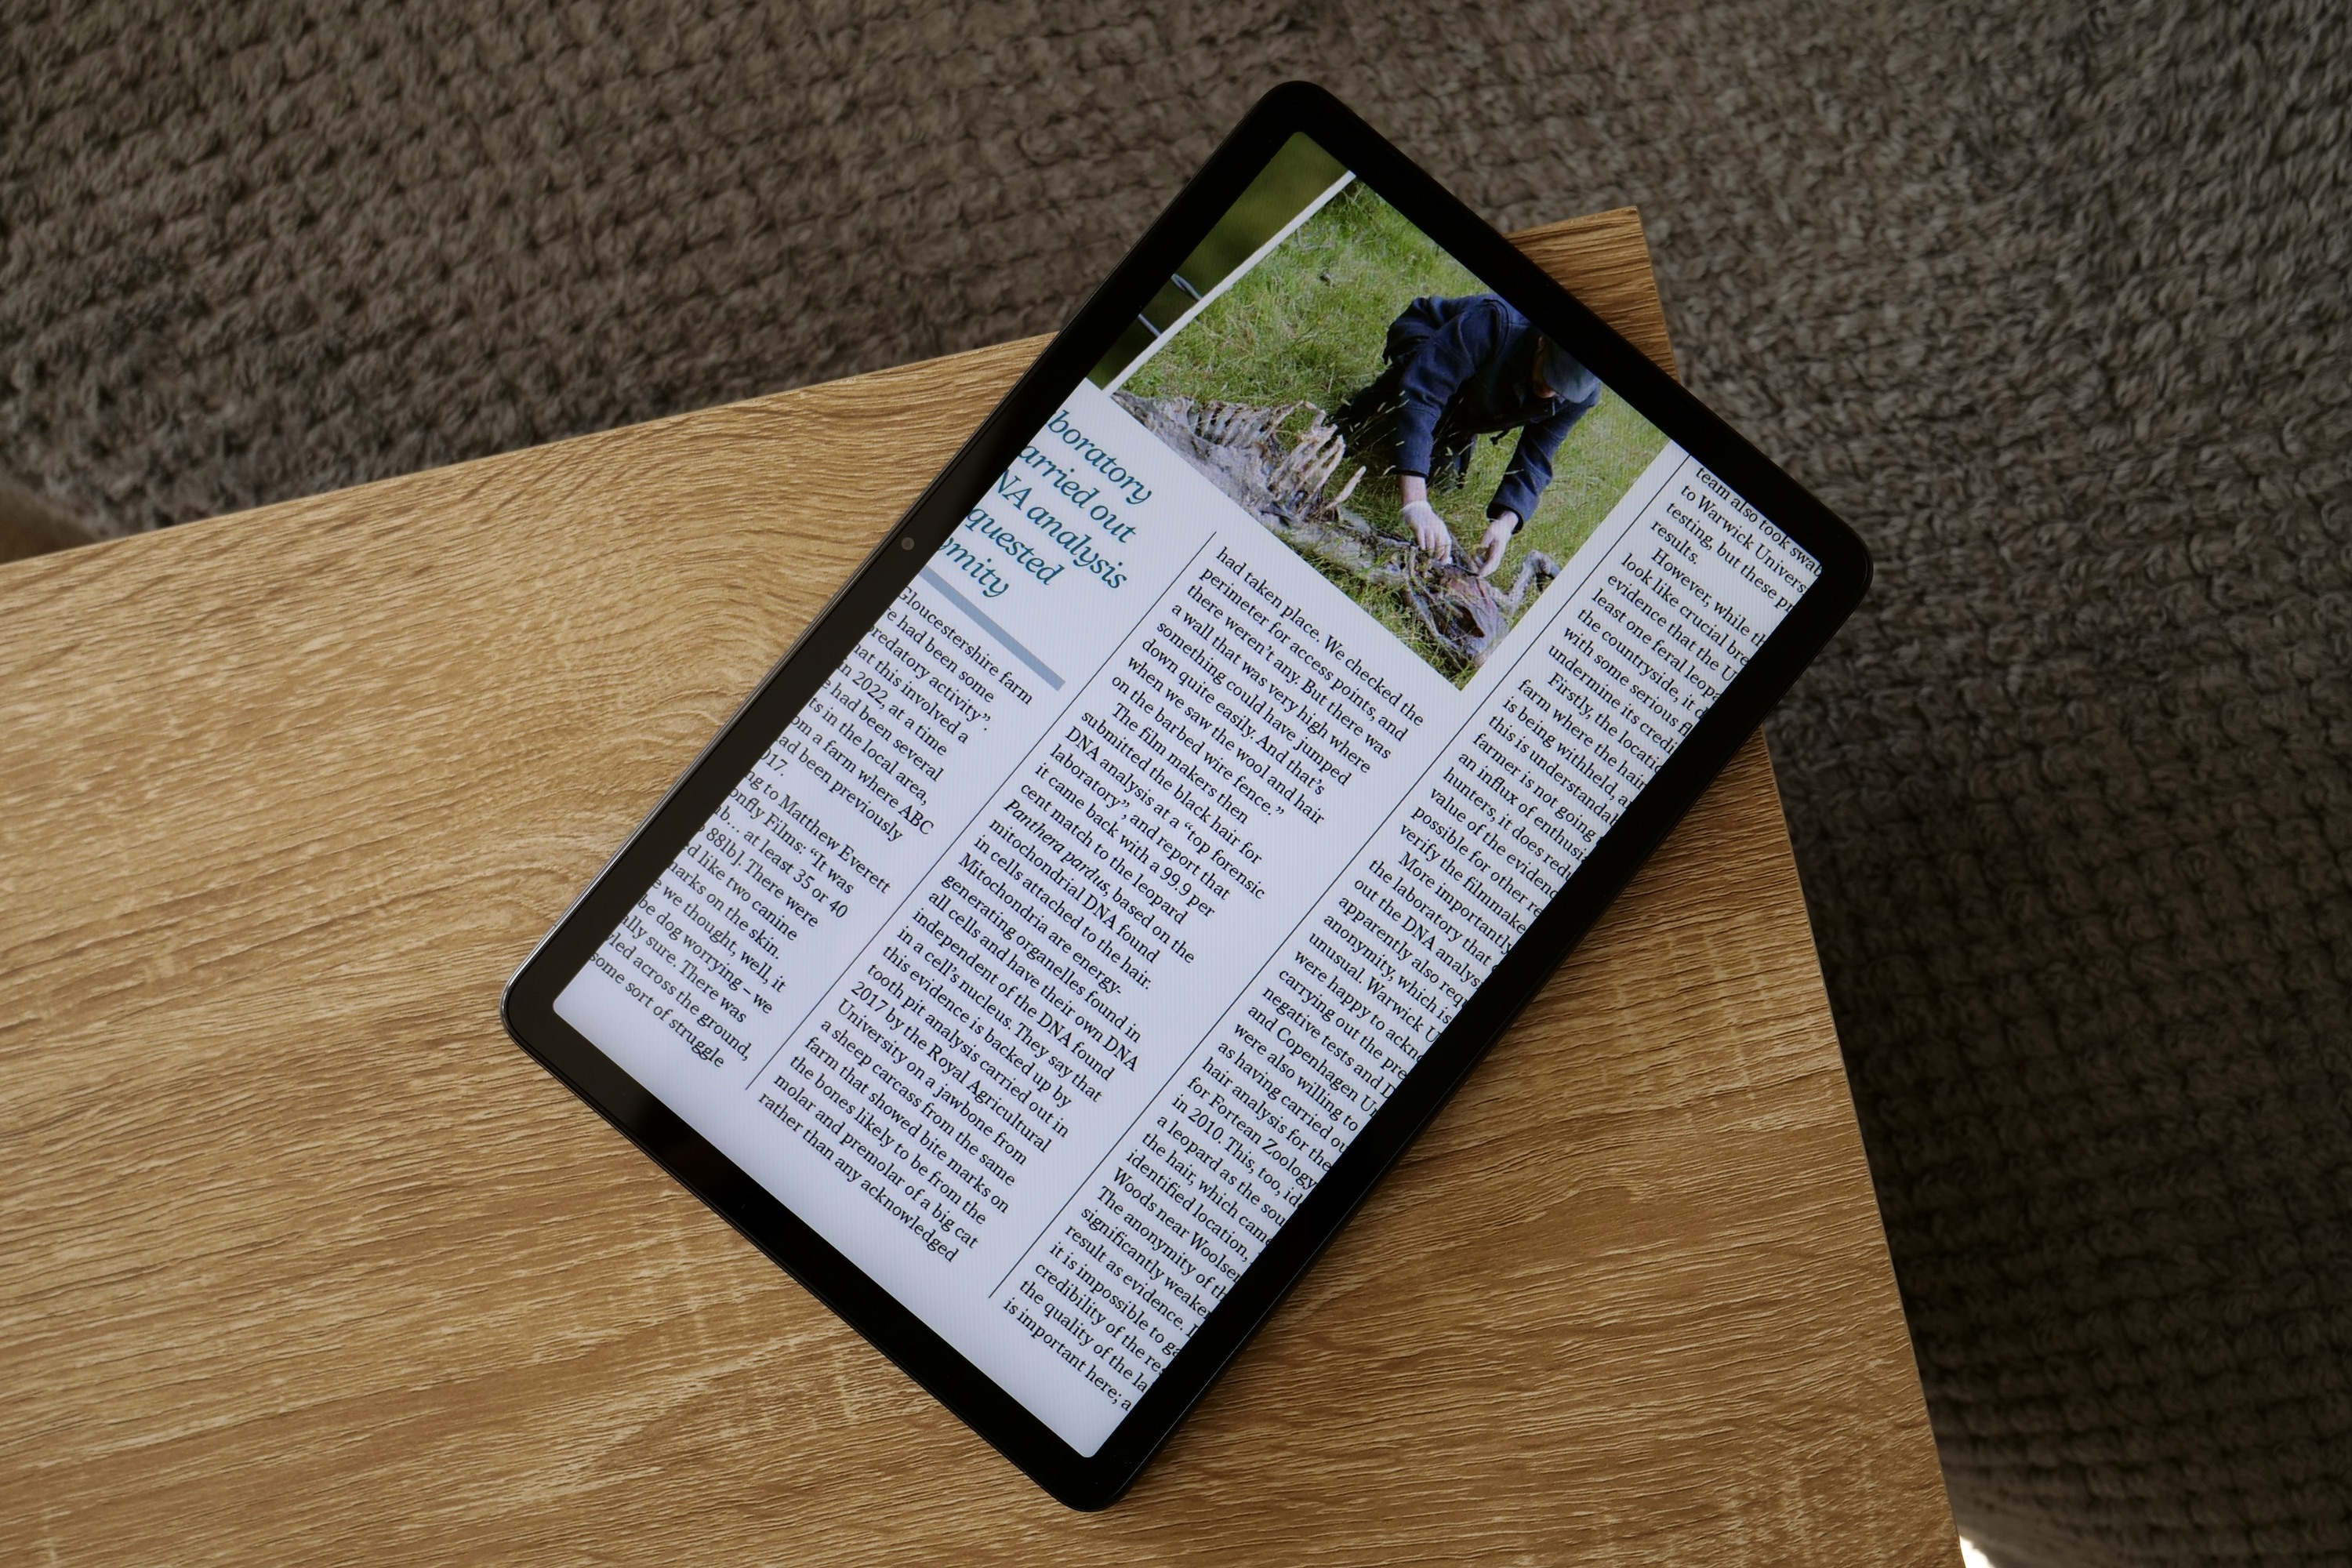 The Amazon Kindle Fire Max 11's zoomed in view of a magazine.